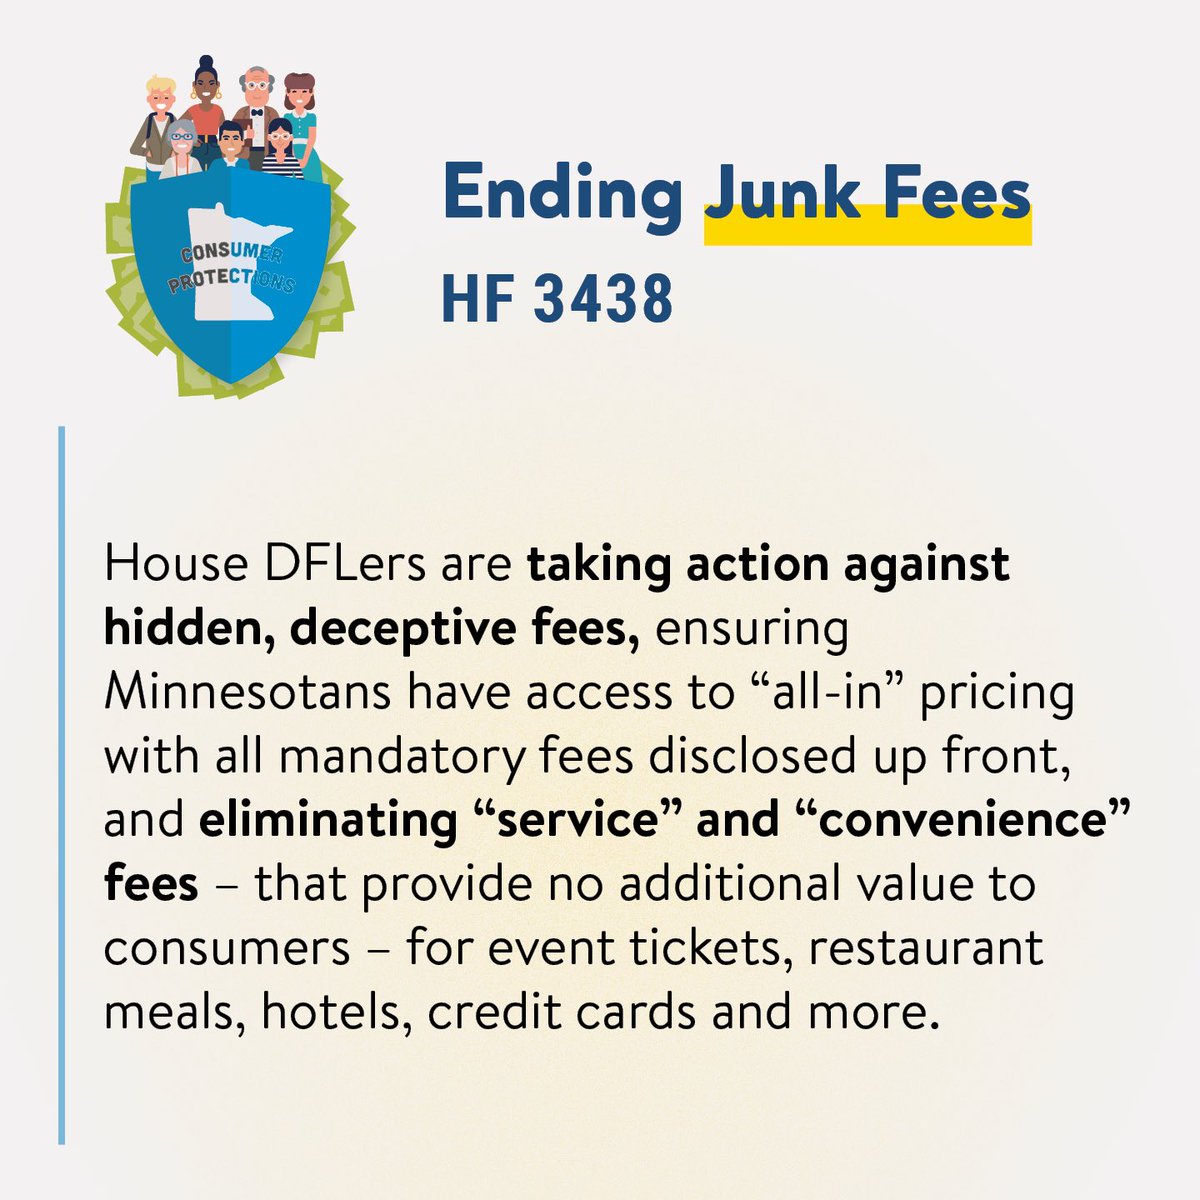 Junk fees are terrible - for consumers, for high road businesses, and for fair markets. We can do something about it -> tonight we passed a bill that requires businesses to ensure that any mandatory fees and surcharges are included in the advertised price. Simple as that. #mnleg